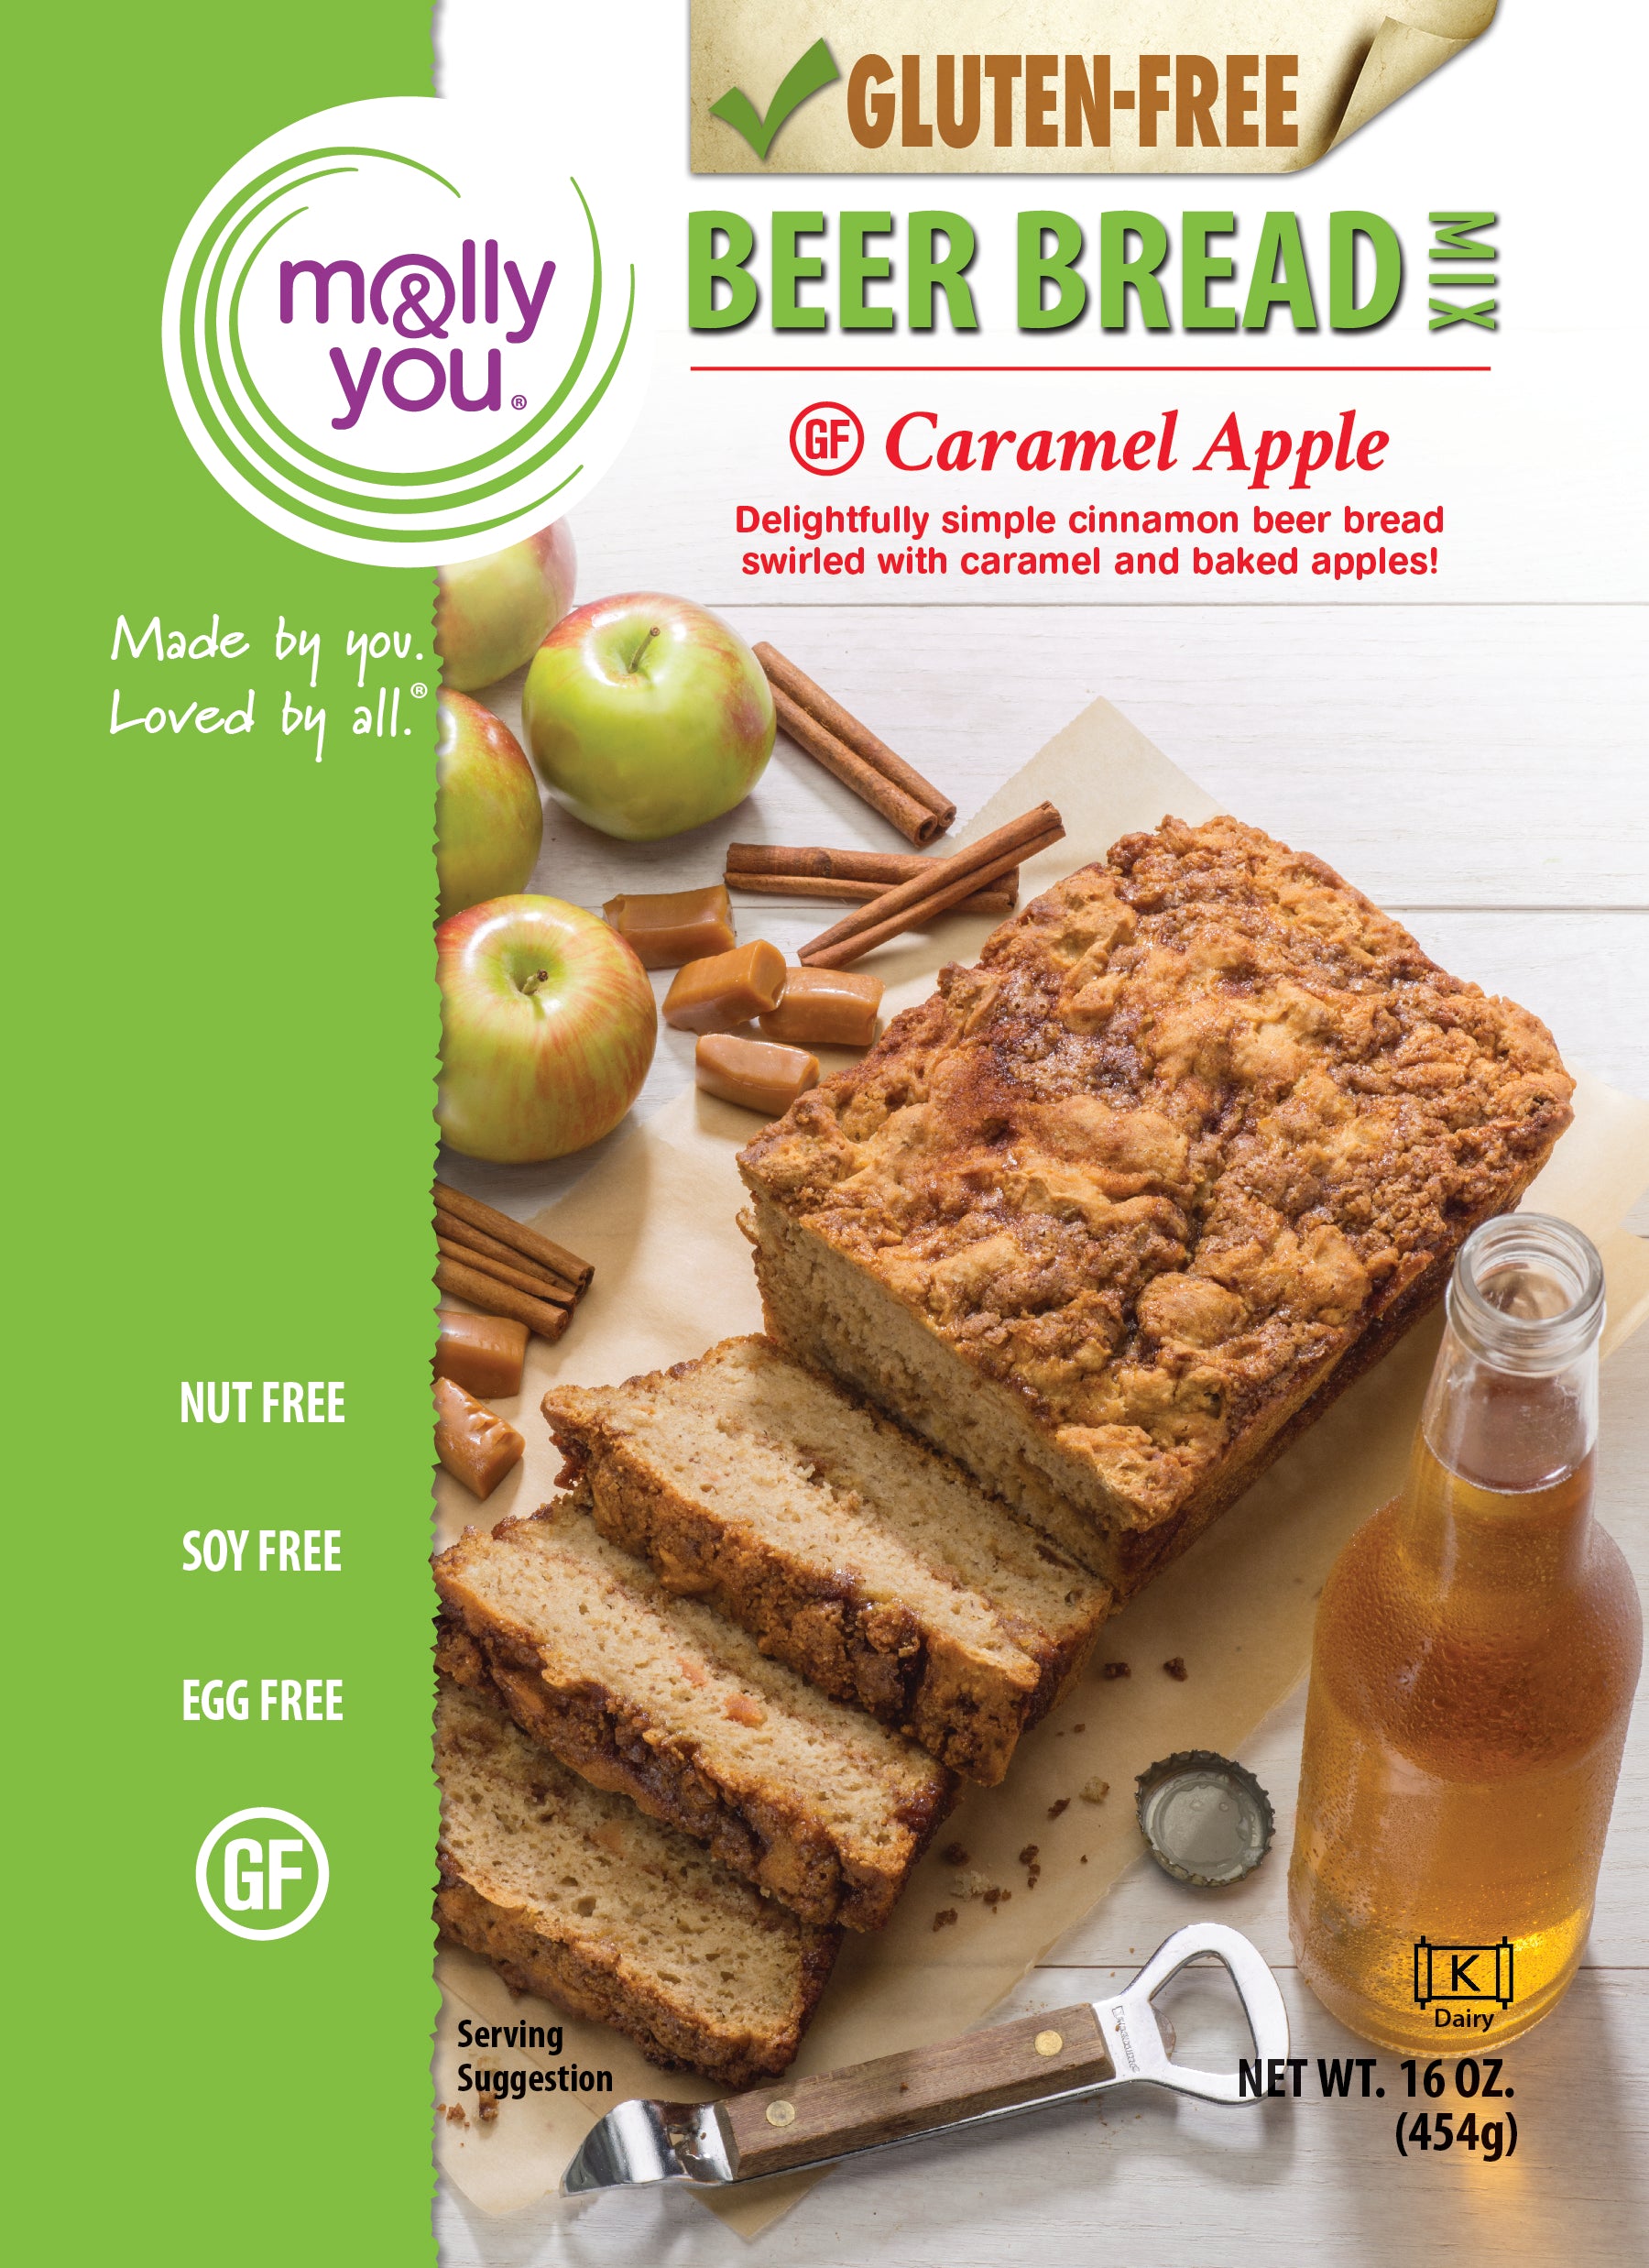 Gluten-Free front of the package Caramel Apple 